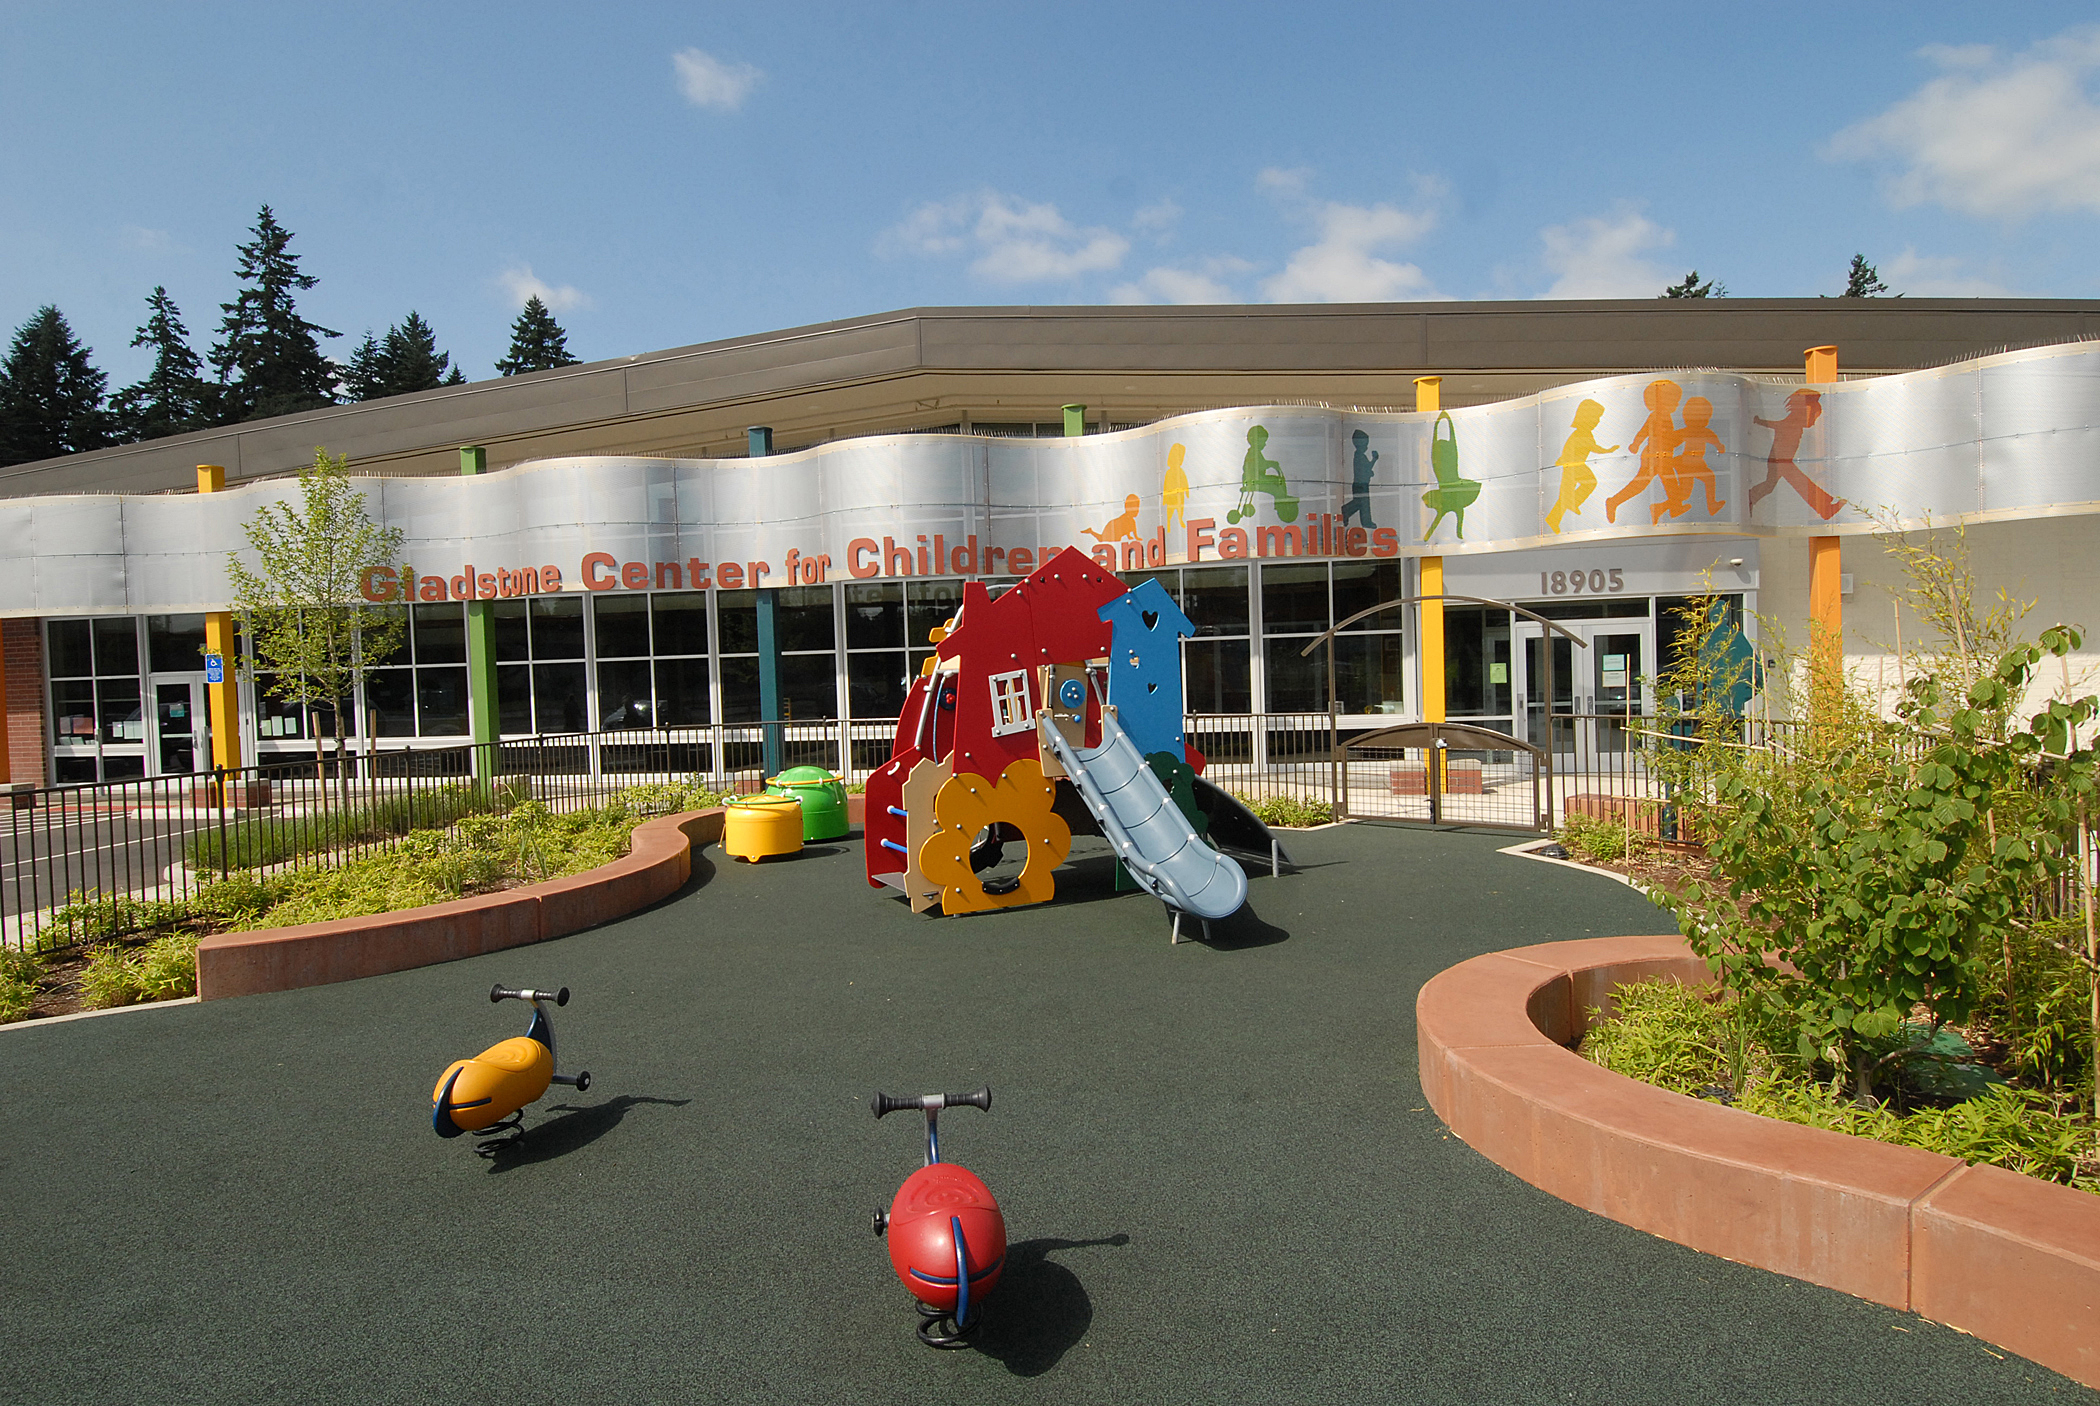 gladstone center for children and families building with slide and playground in foreground